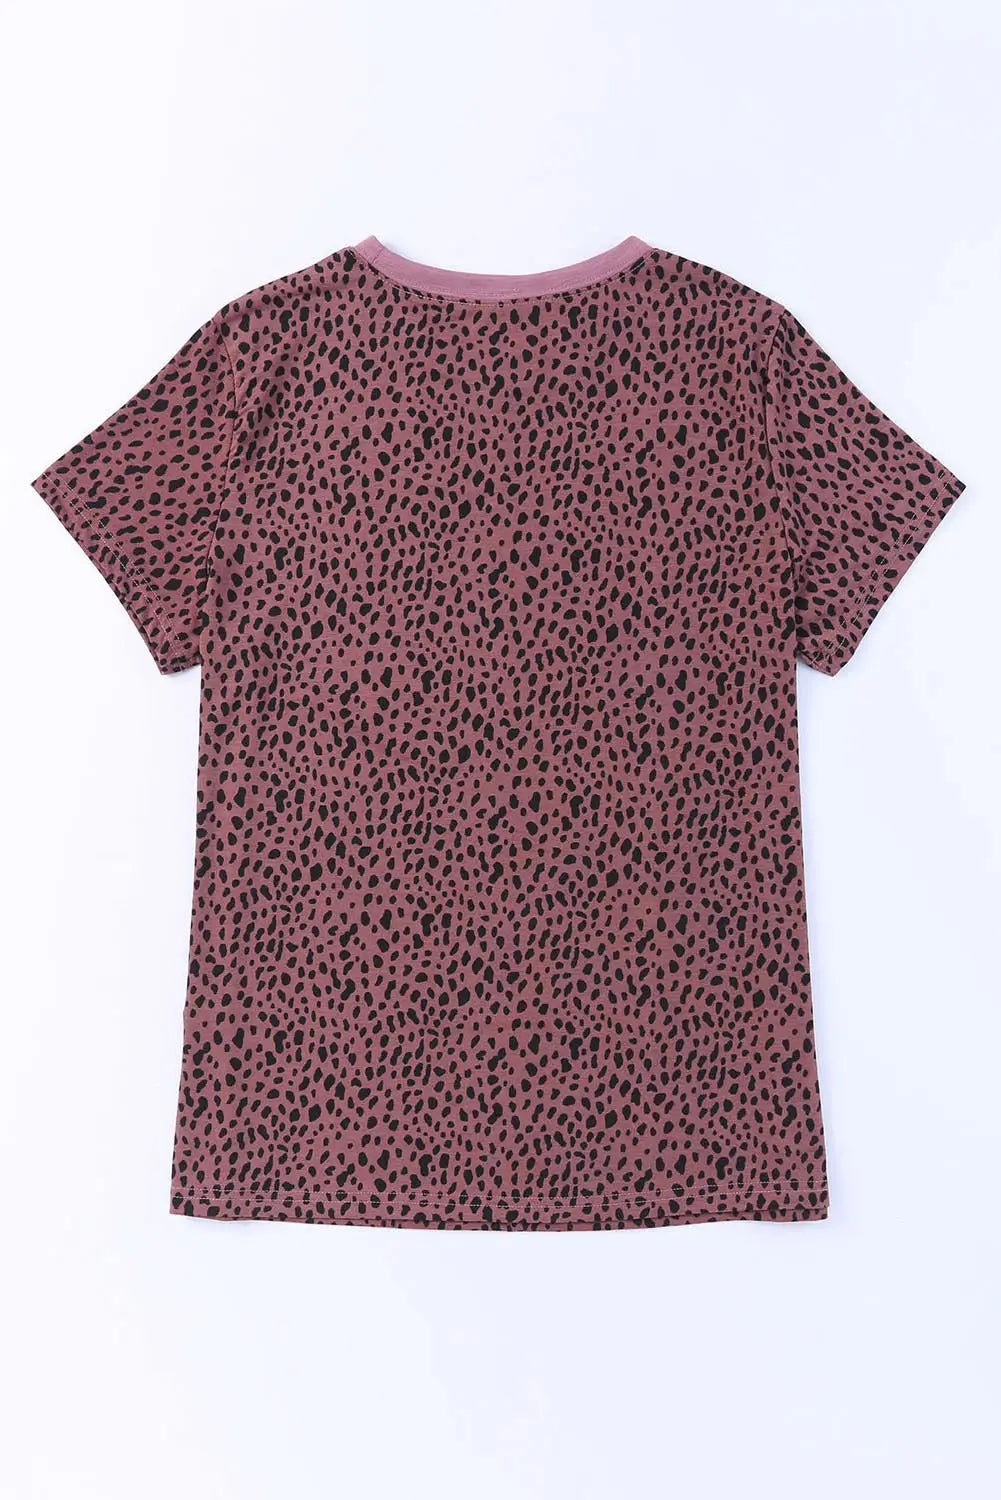 Animal Spotted Print Round Neck Long Sleeve Top-33